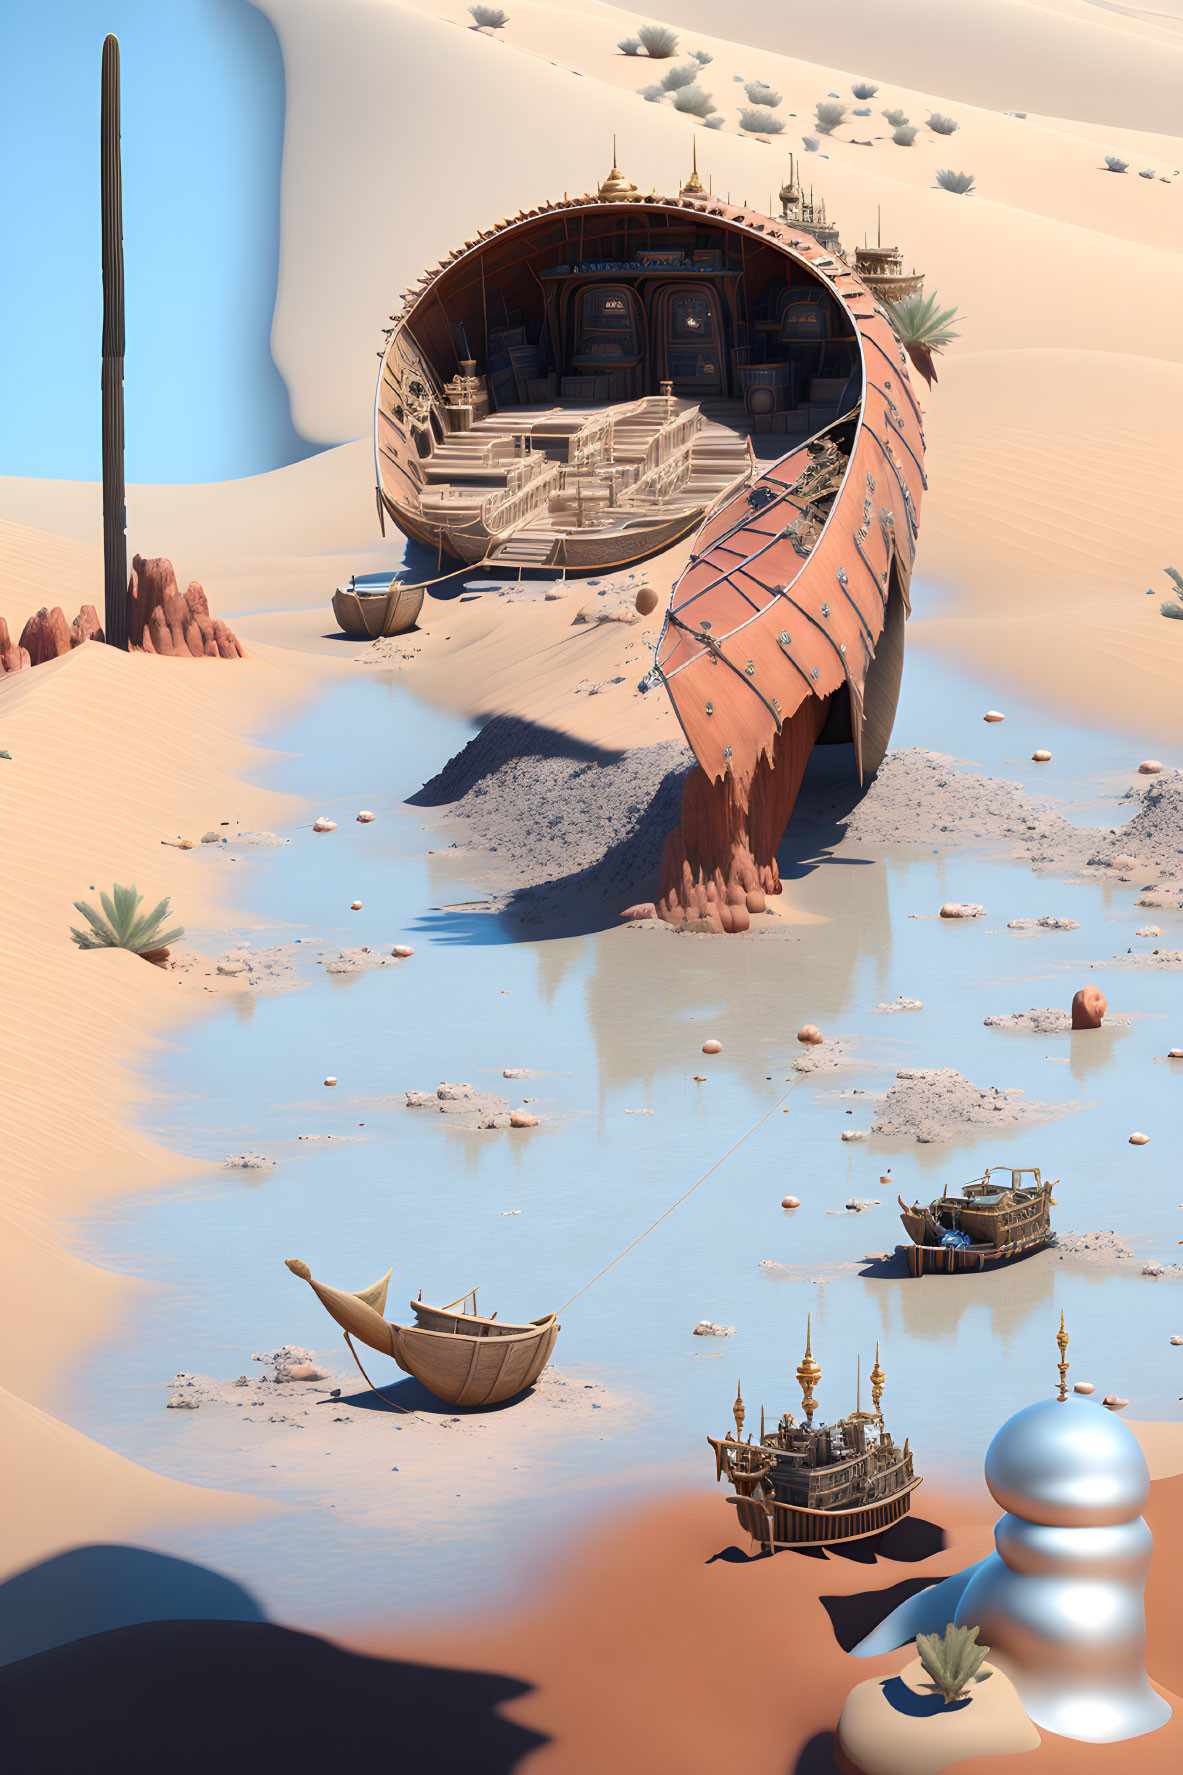 Surreal desert landscape with shipwreck, boats, quirky structures, and water pools